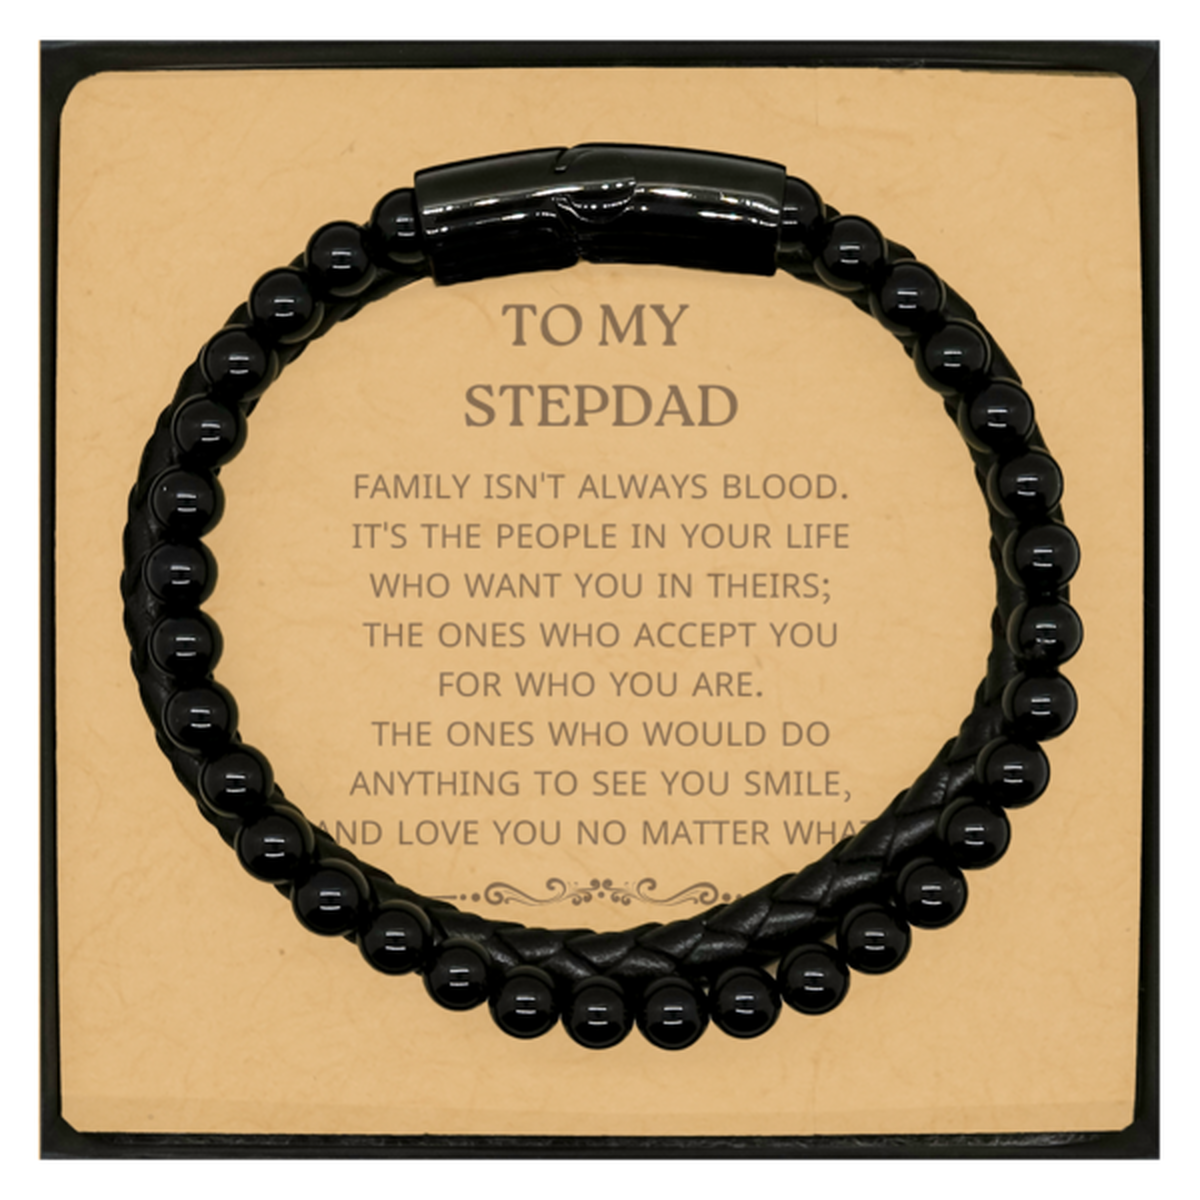 To My Stepdad Gifts, Family isn't always blood, Stepdad Stone Leather Bracelets, Birthday Christmas Unique Present For Stepdad